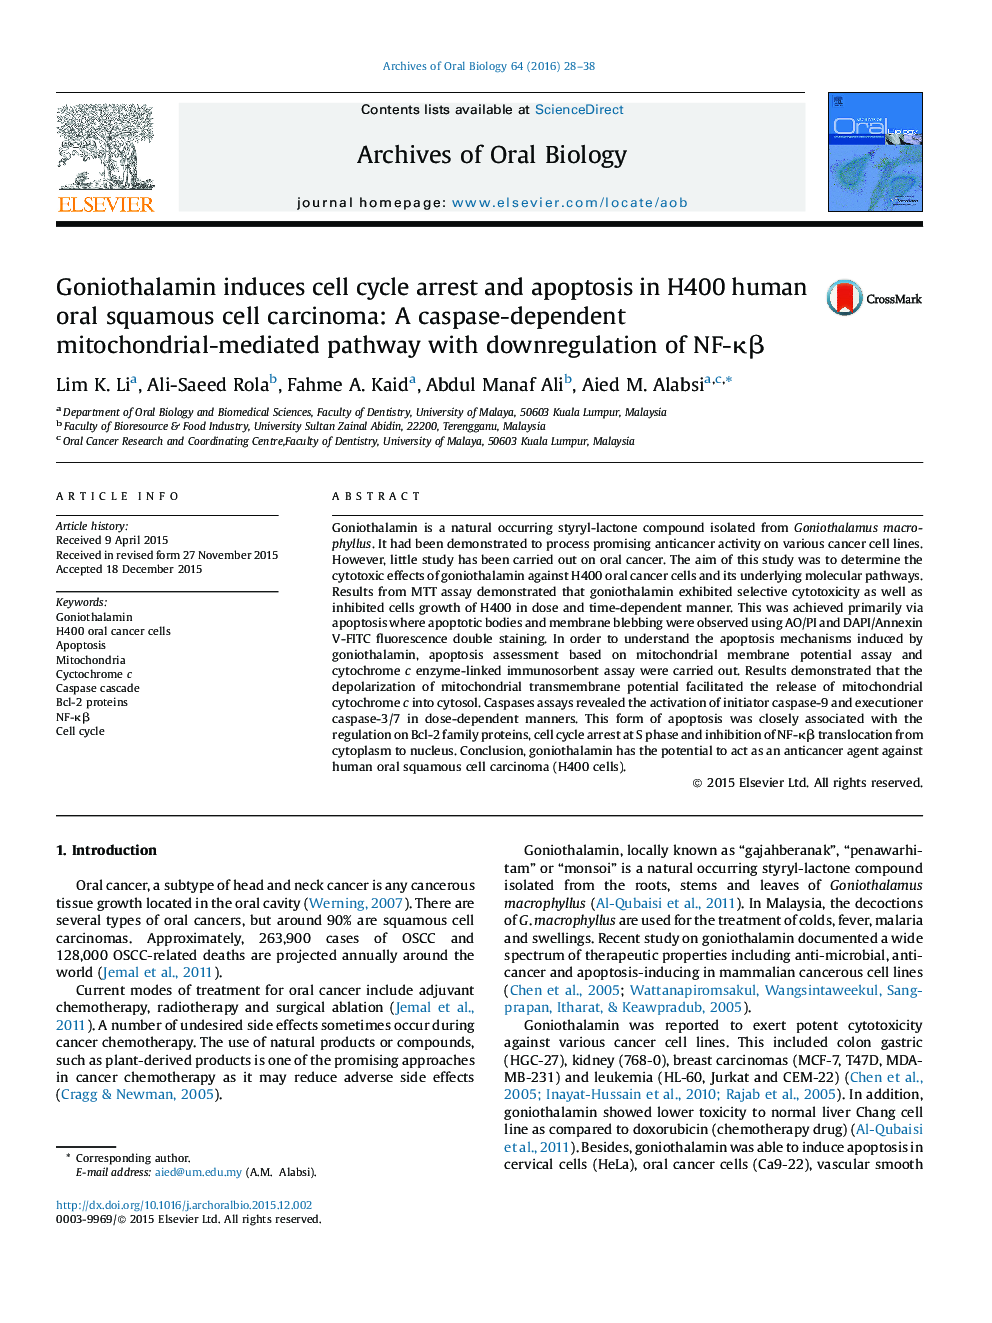 Goniothalamin induces cell cycle arrest and apoptosis in H400 human oral squamous cell carcinoma: A caspase-dependent mitochondrial-mediated pathway with downregulation of NF-κβ